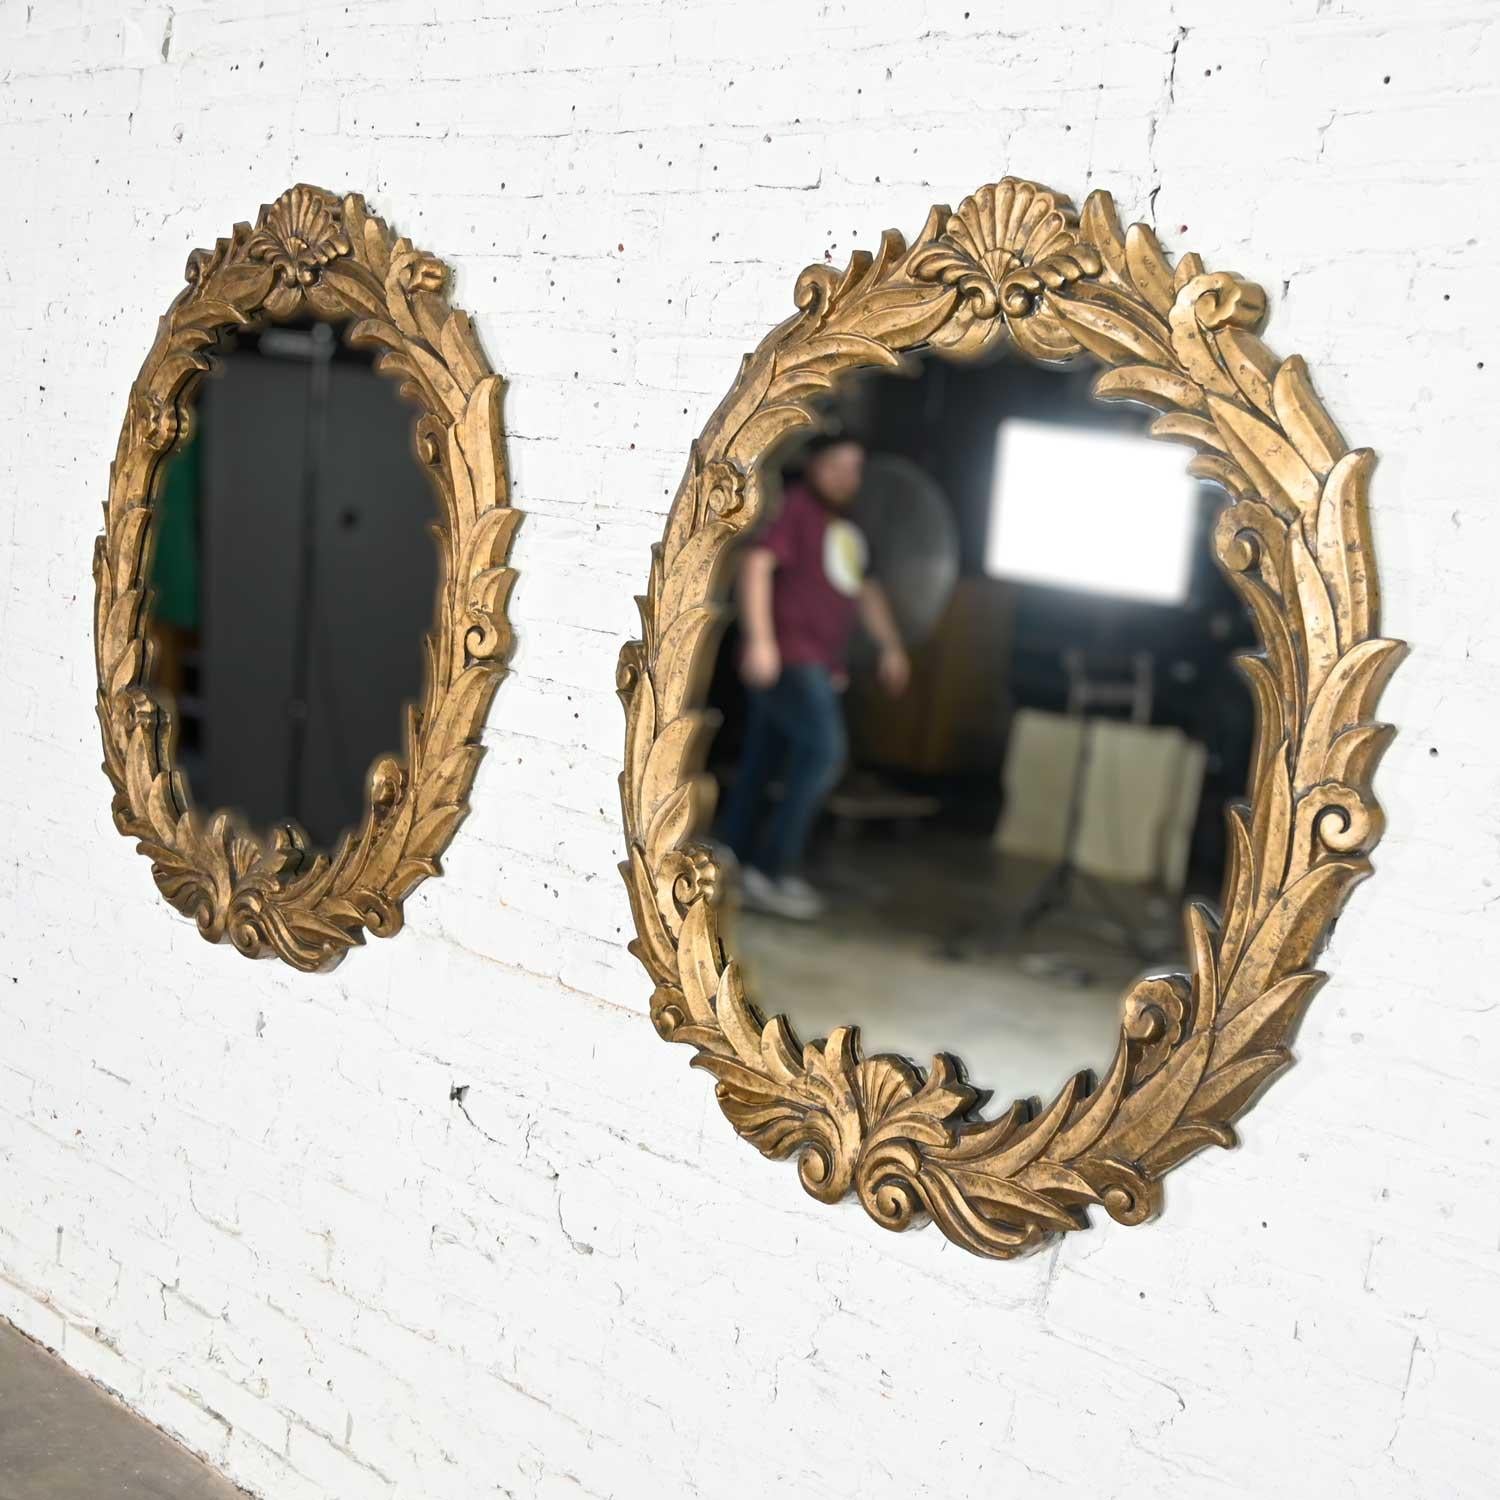 Art Deco Gilded Resin Mirrors Anthemion Foliate Design a Pair Style Serge Roche In Good Condition For Sale In Topeka, KS